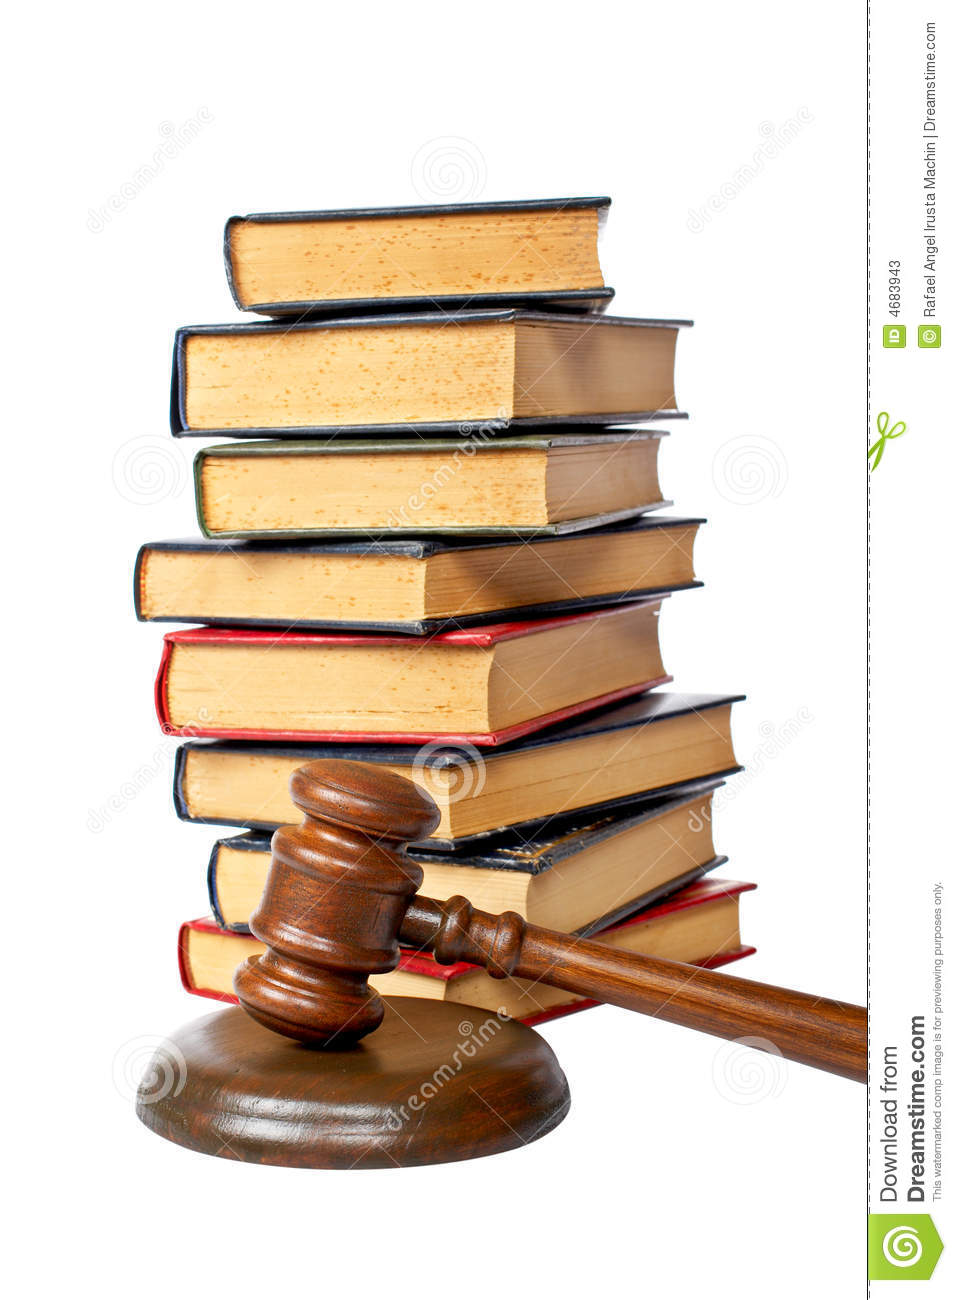 Wooden Gavel From The Court And Old Law Books Isolated On White